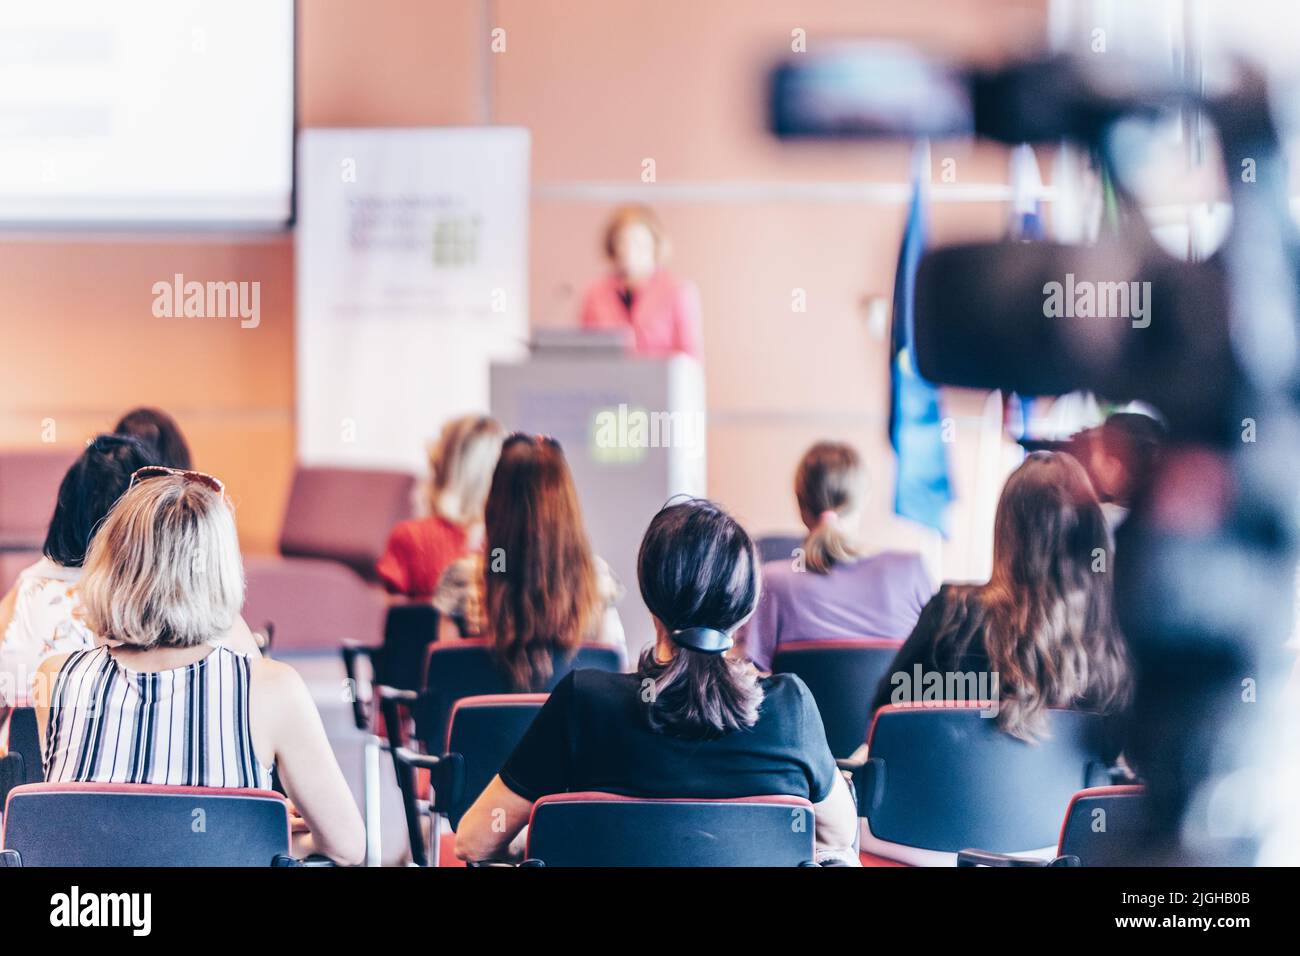 Woman giving presentation on business conference event. Stock Photo